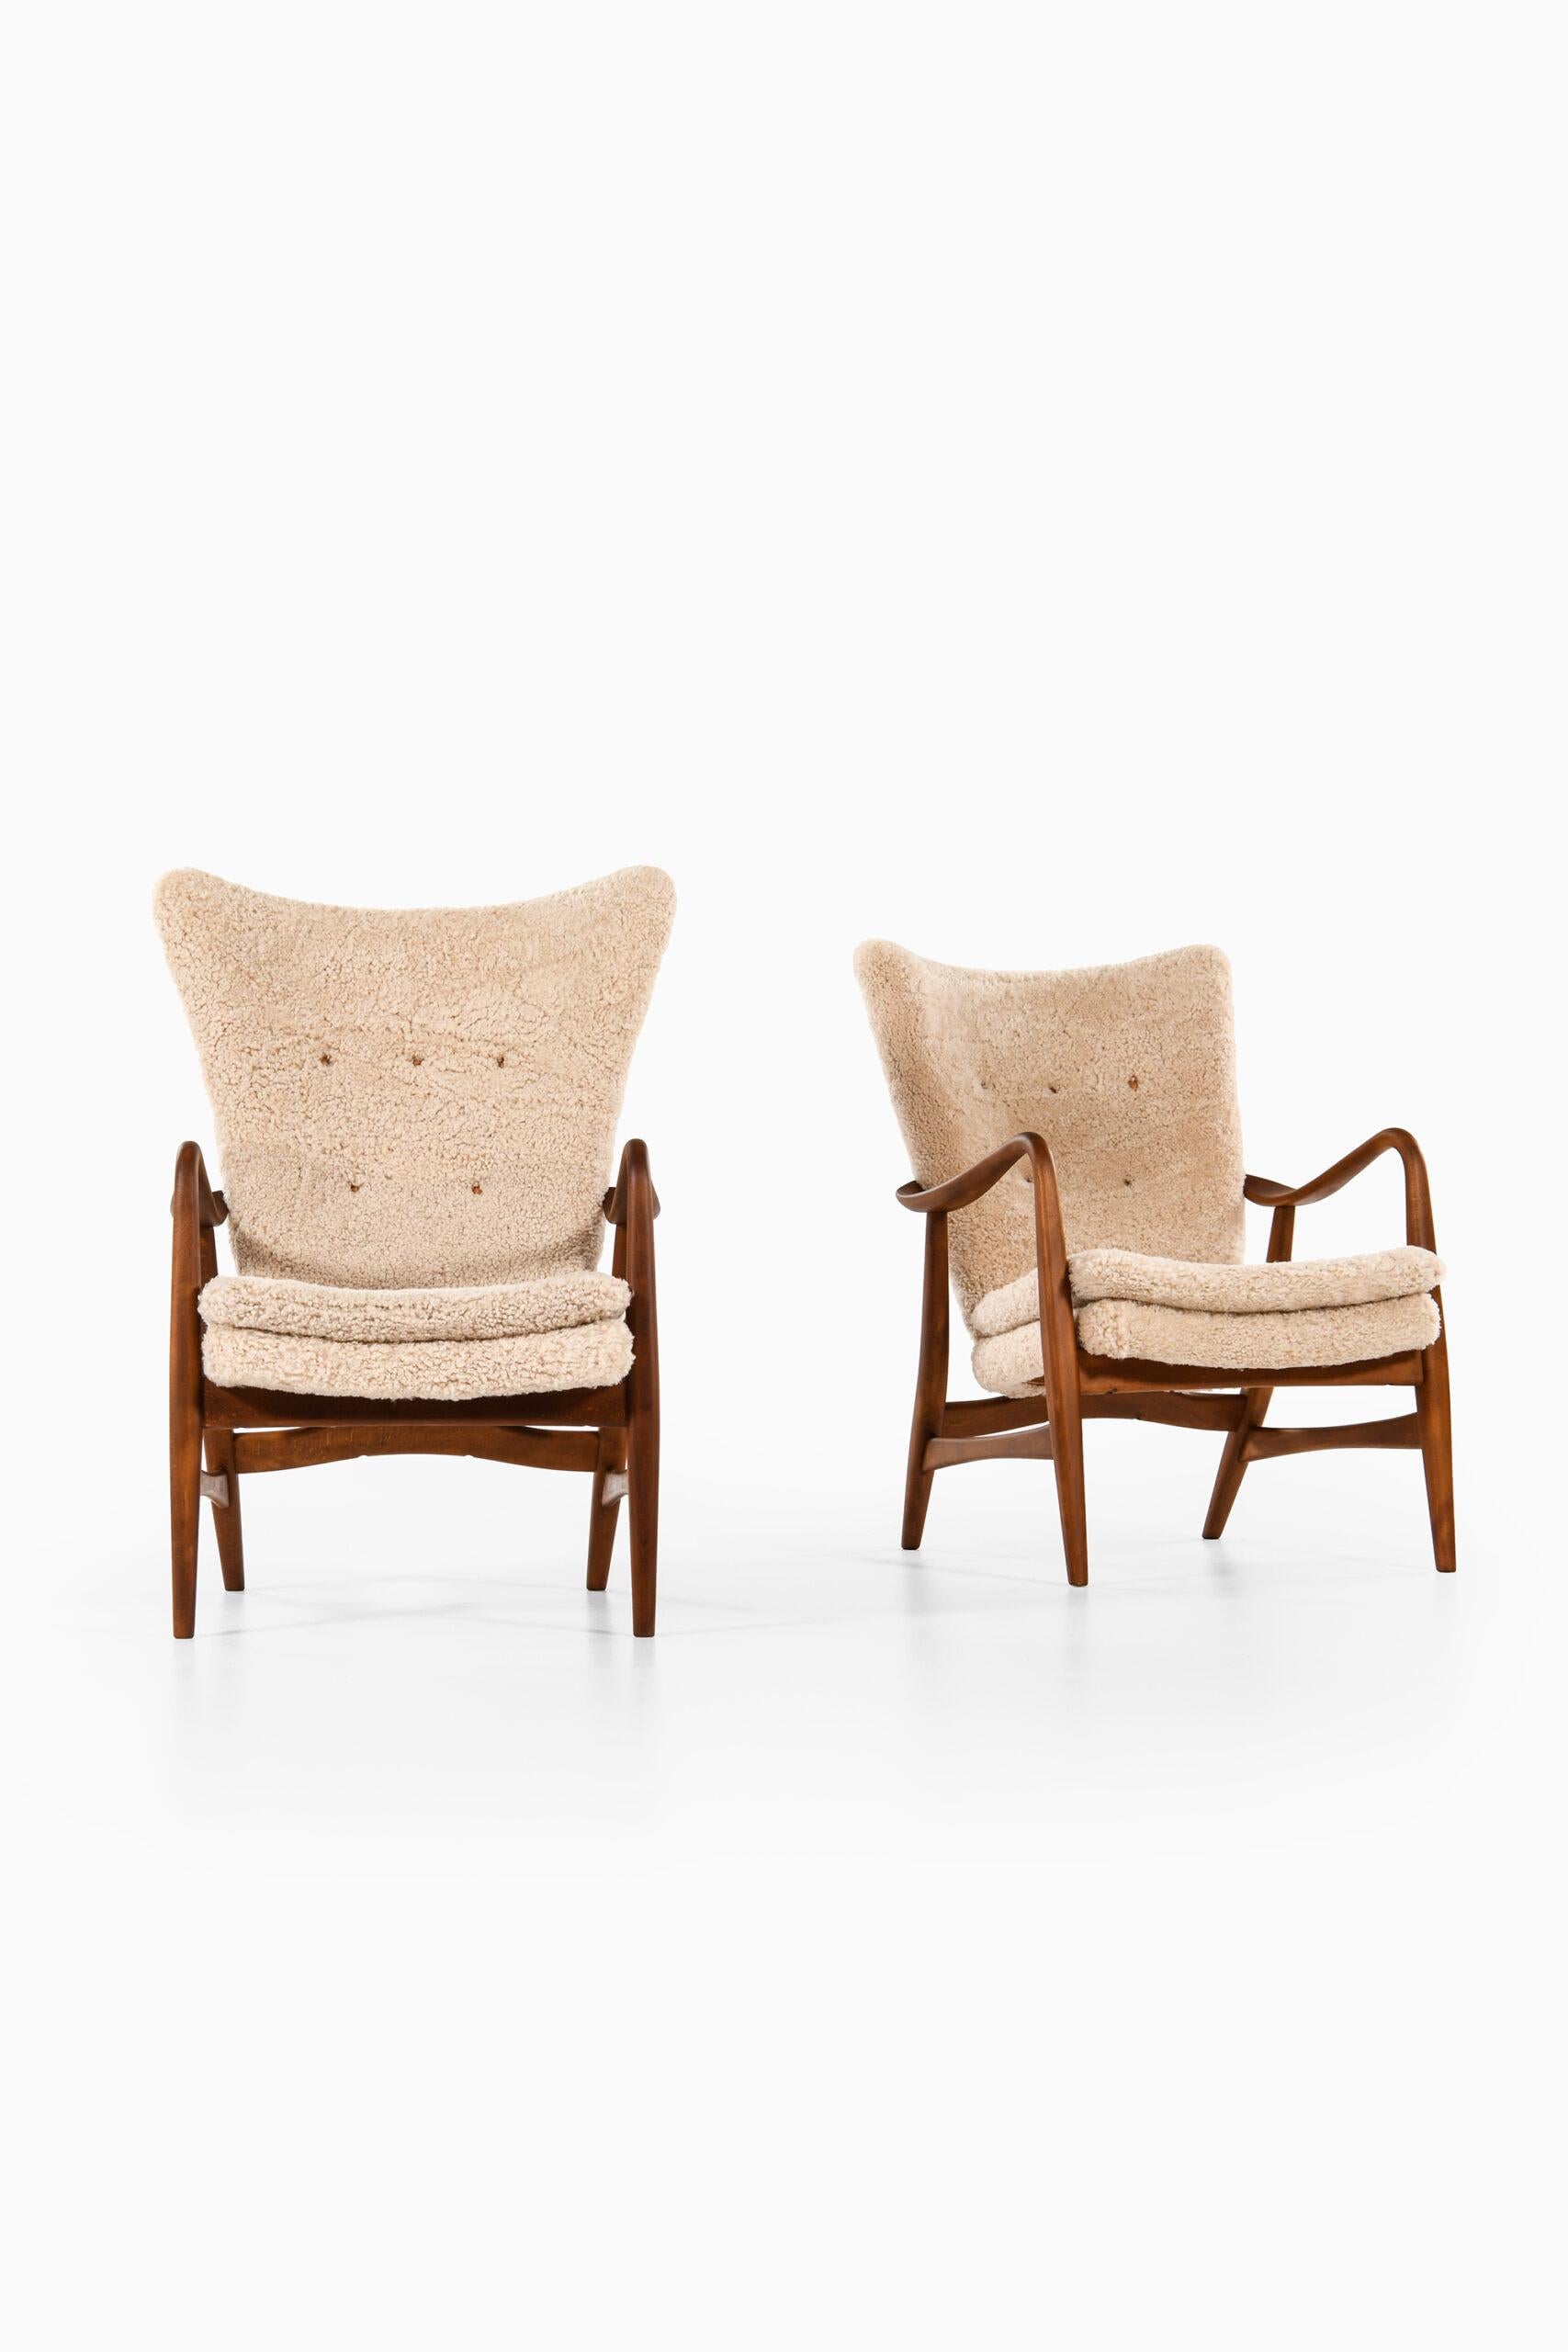 Rare pair of easy chairs designed by Ib Madsen & Acton Schubell. Produced by Madsen & Schubell in Denmark.
Dimensions low-back (W x D x H): 68 x 84 x 94 cm, SH: 45 cm.
Dimensions high-back (W x D x H): 68 x 84 x 103 cm, SH: 45 cm.